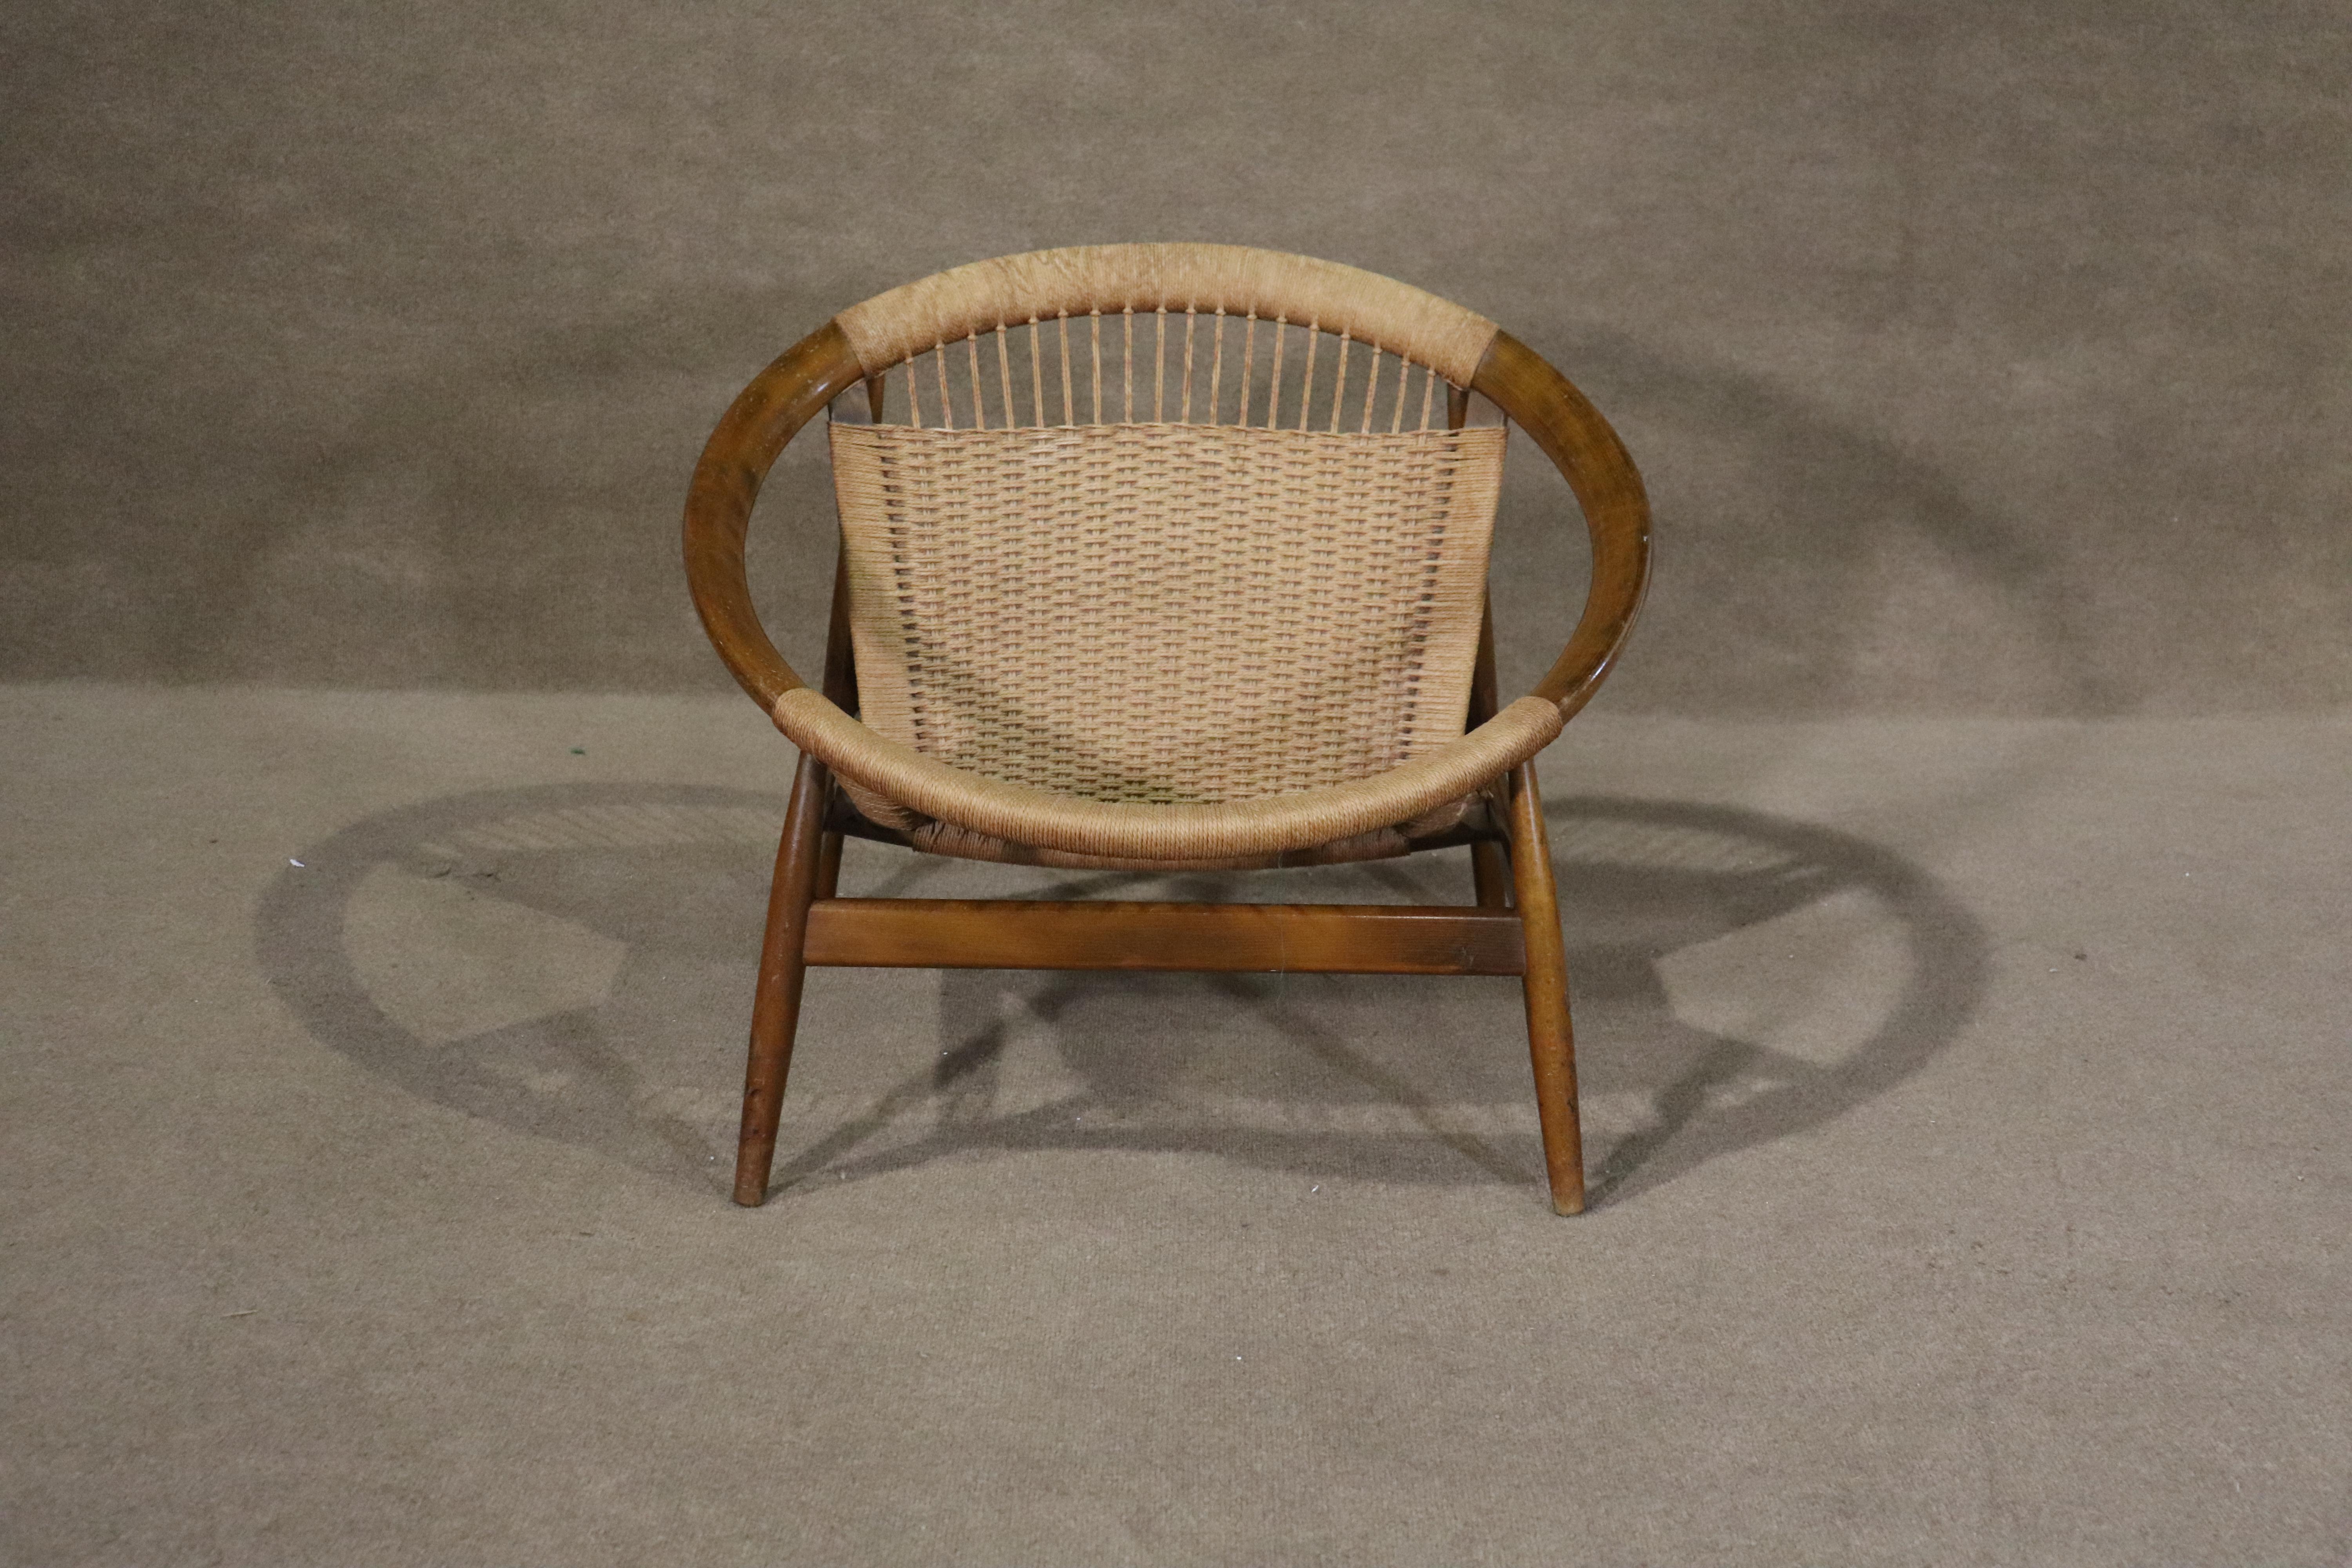 This iconic mid-century modern hoop chair, designed by Illum Wikkelsø, features a round walnut frame with woven rope seating. Comfortable for indoor and outdoor settings.
Please confirm location NY or NJ